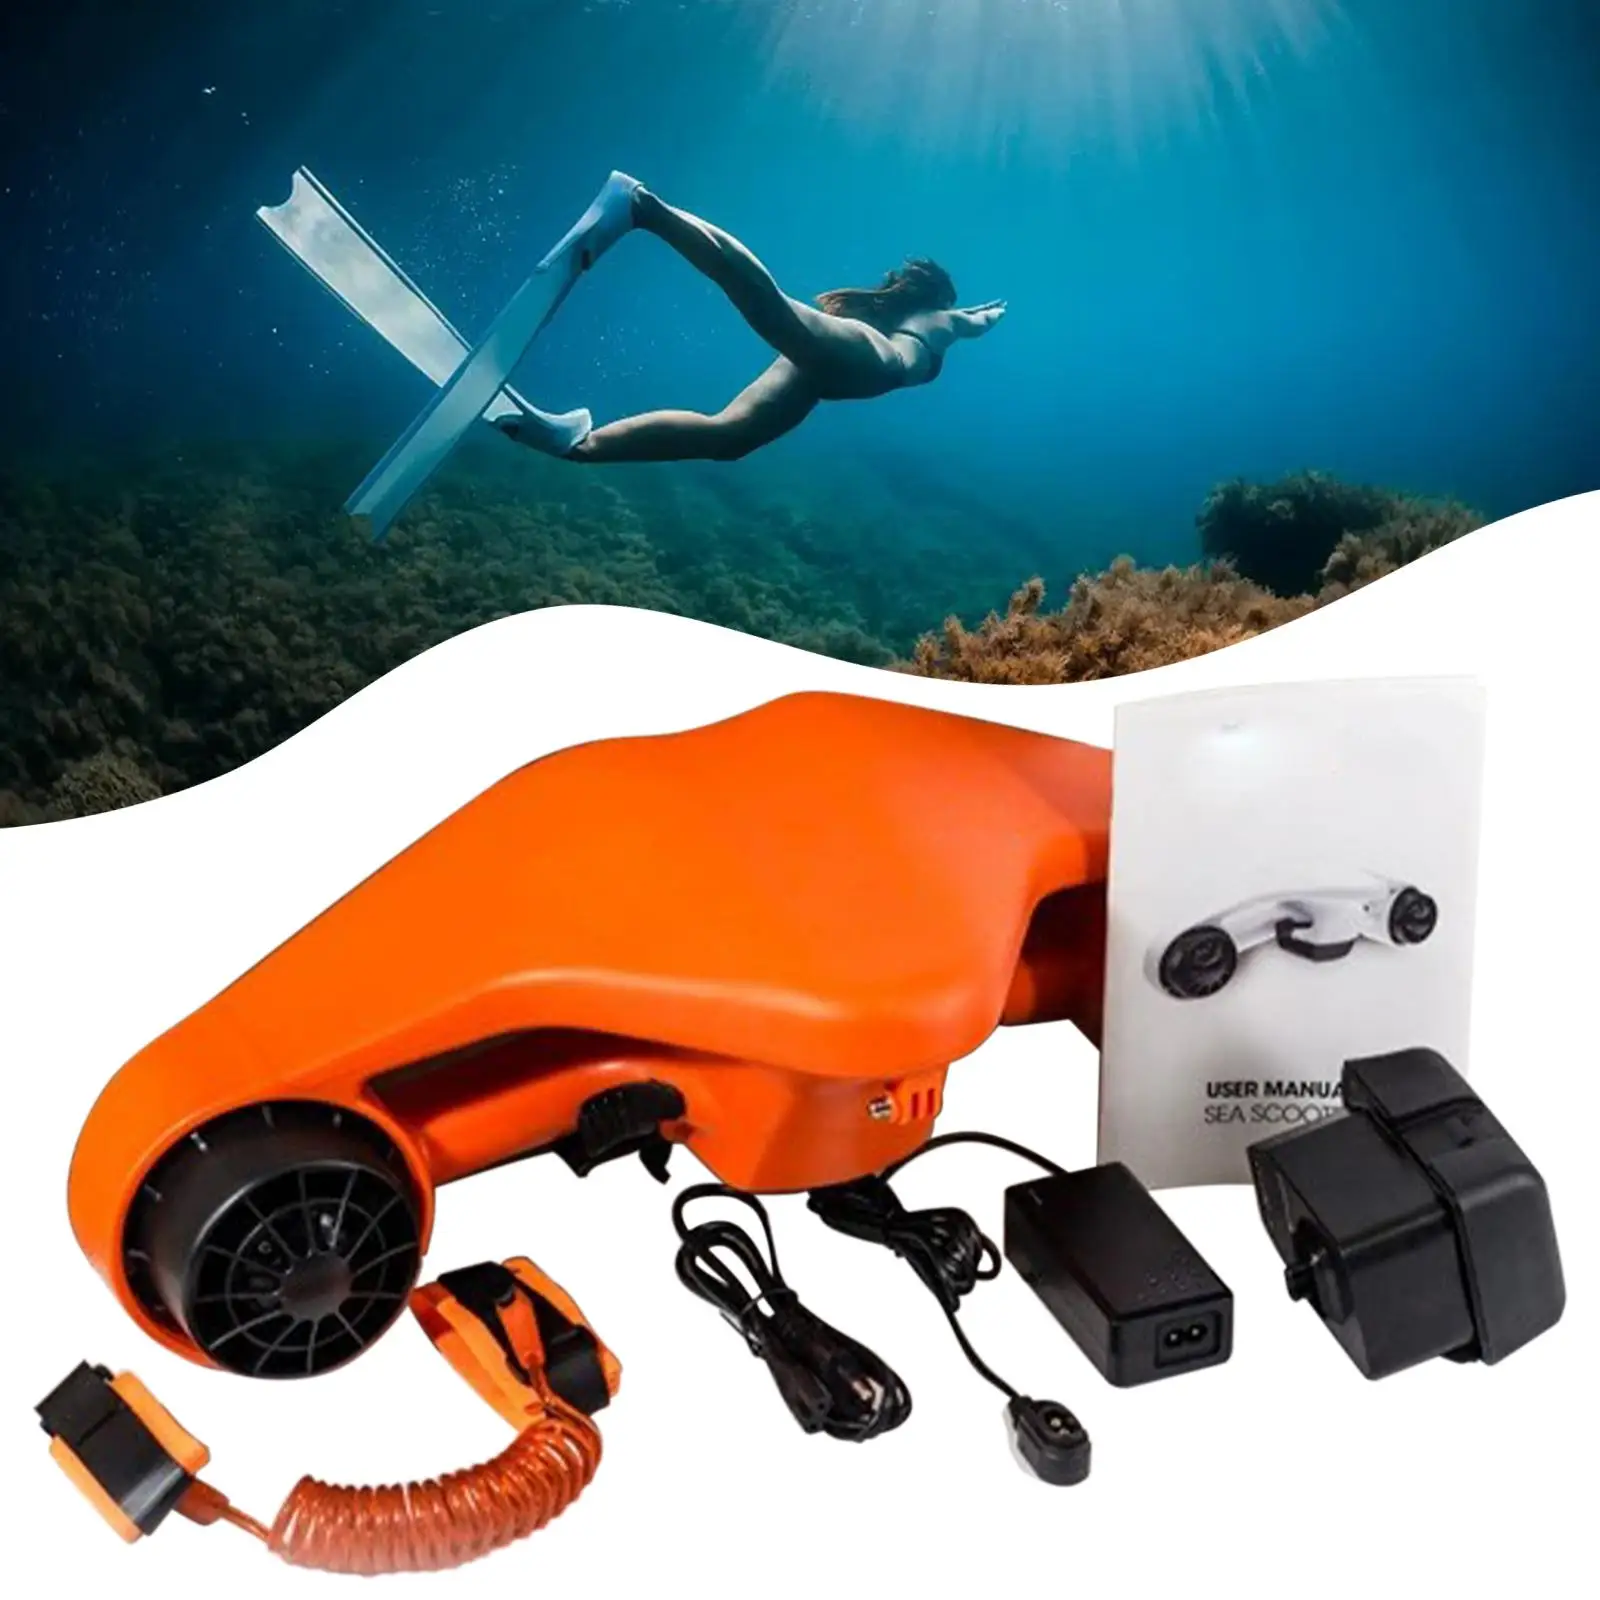 Electric Sea Scooter Water Propeller Diving Booster 3 Speed for Water Sports